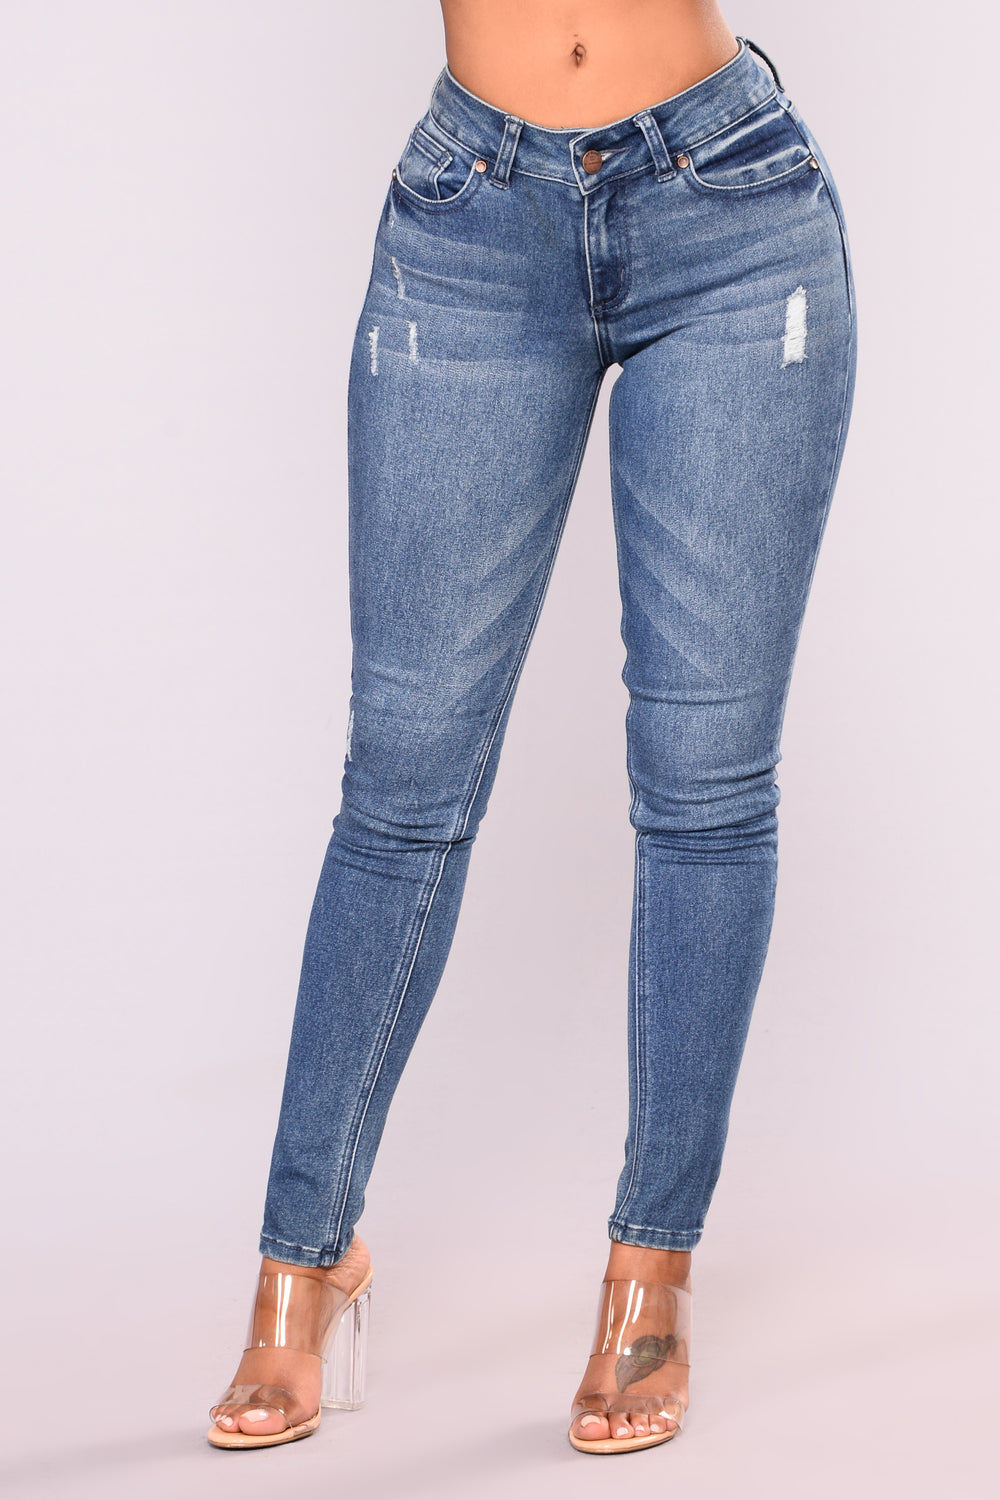 Gin And Tonic Skinny Jeans - Medium Blue Wash